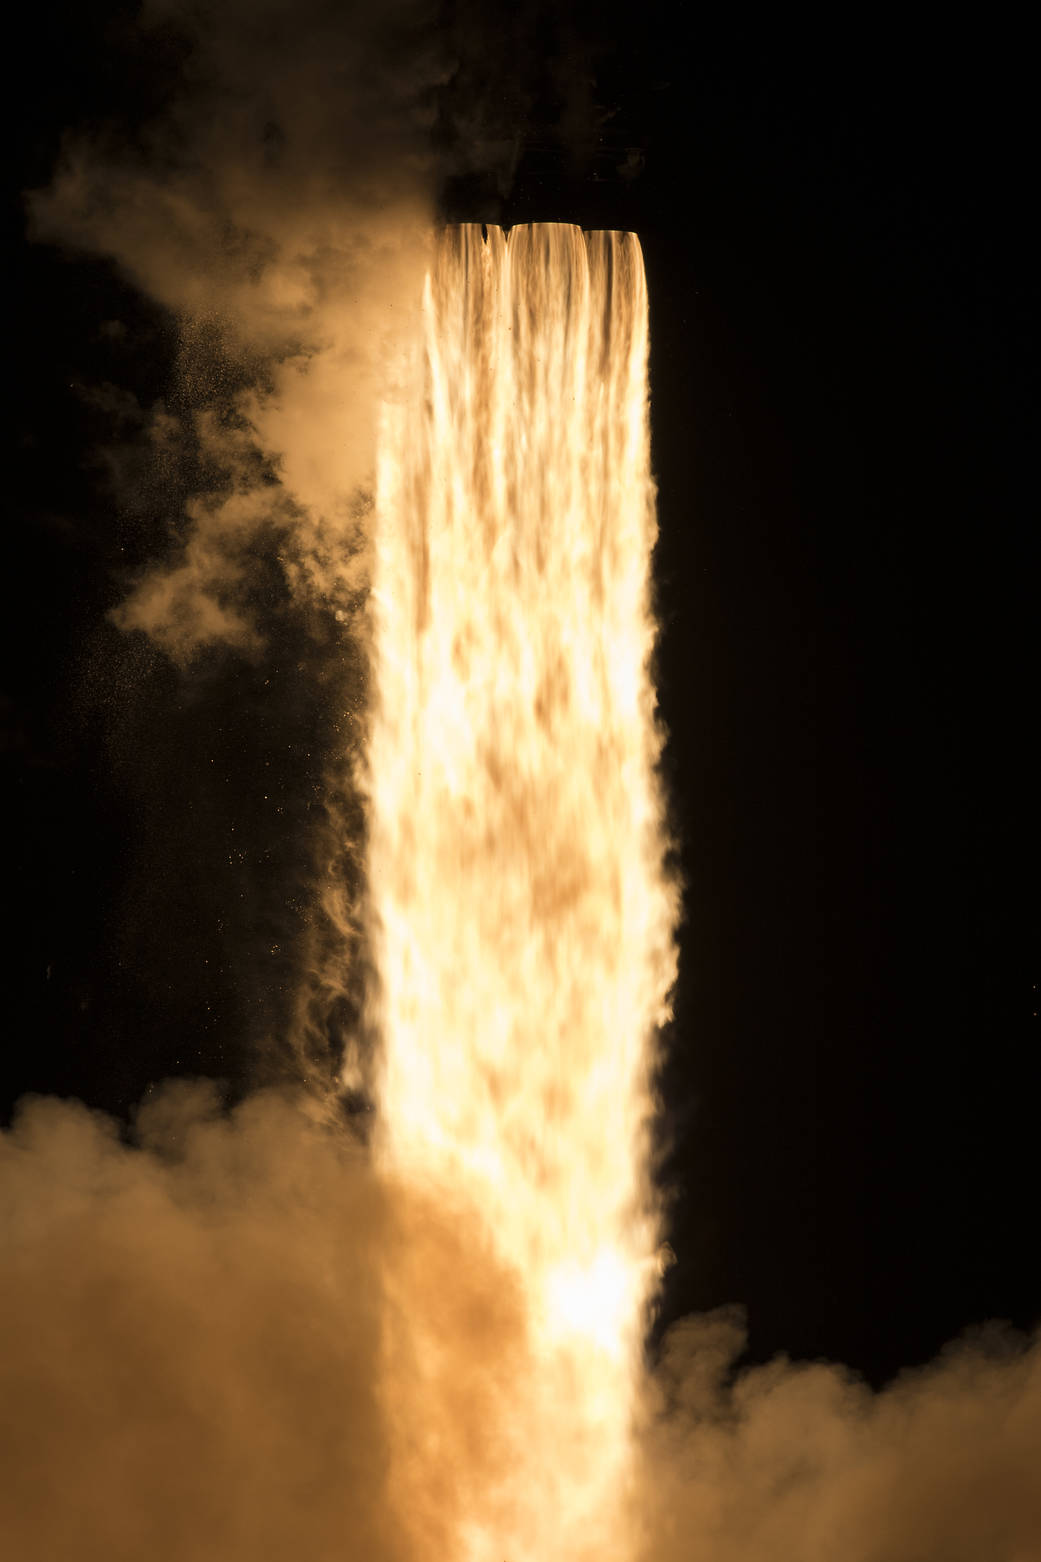 A SpaceX Falcon 9 rocket carrying the company's Crew Dragon spacecraft is launched on NASA’s SpaceX Crew-4 mission on April 27, 2022.